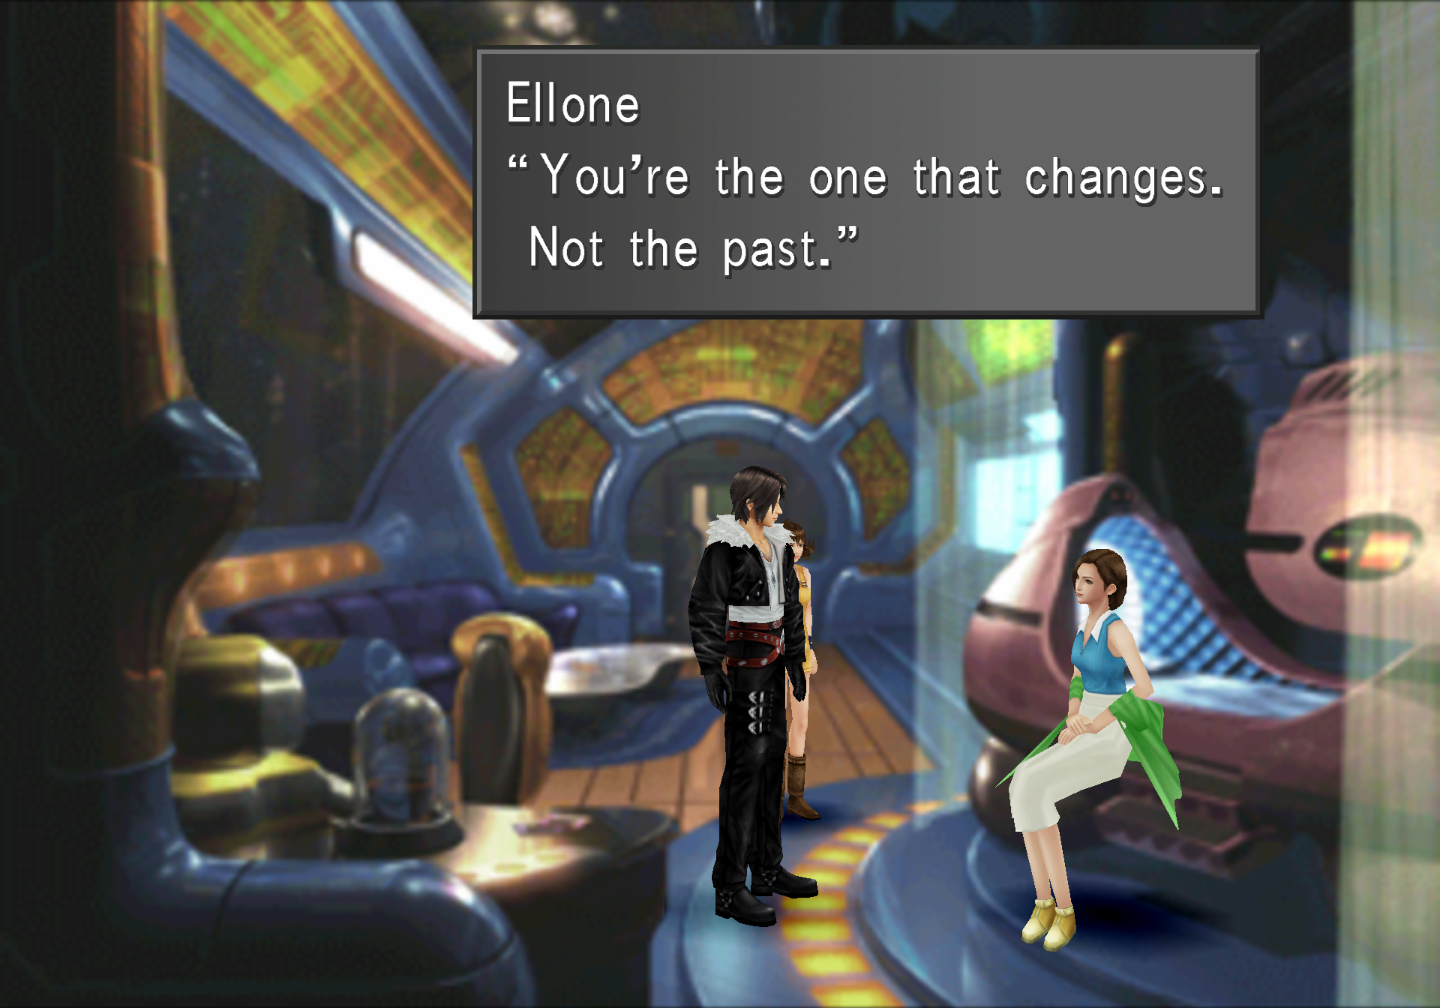 Ellone on the Lunar Base. She says to Squall, "You're the one that changes. Not the past."